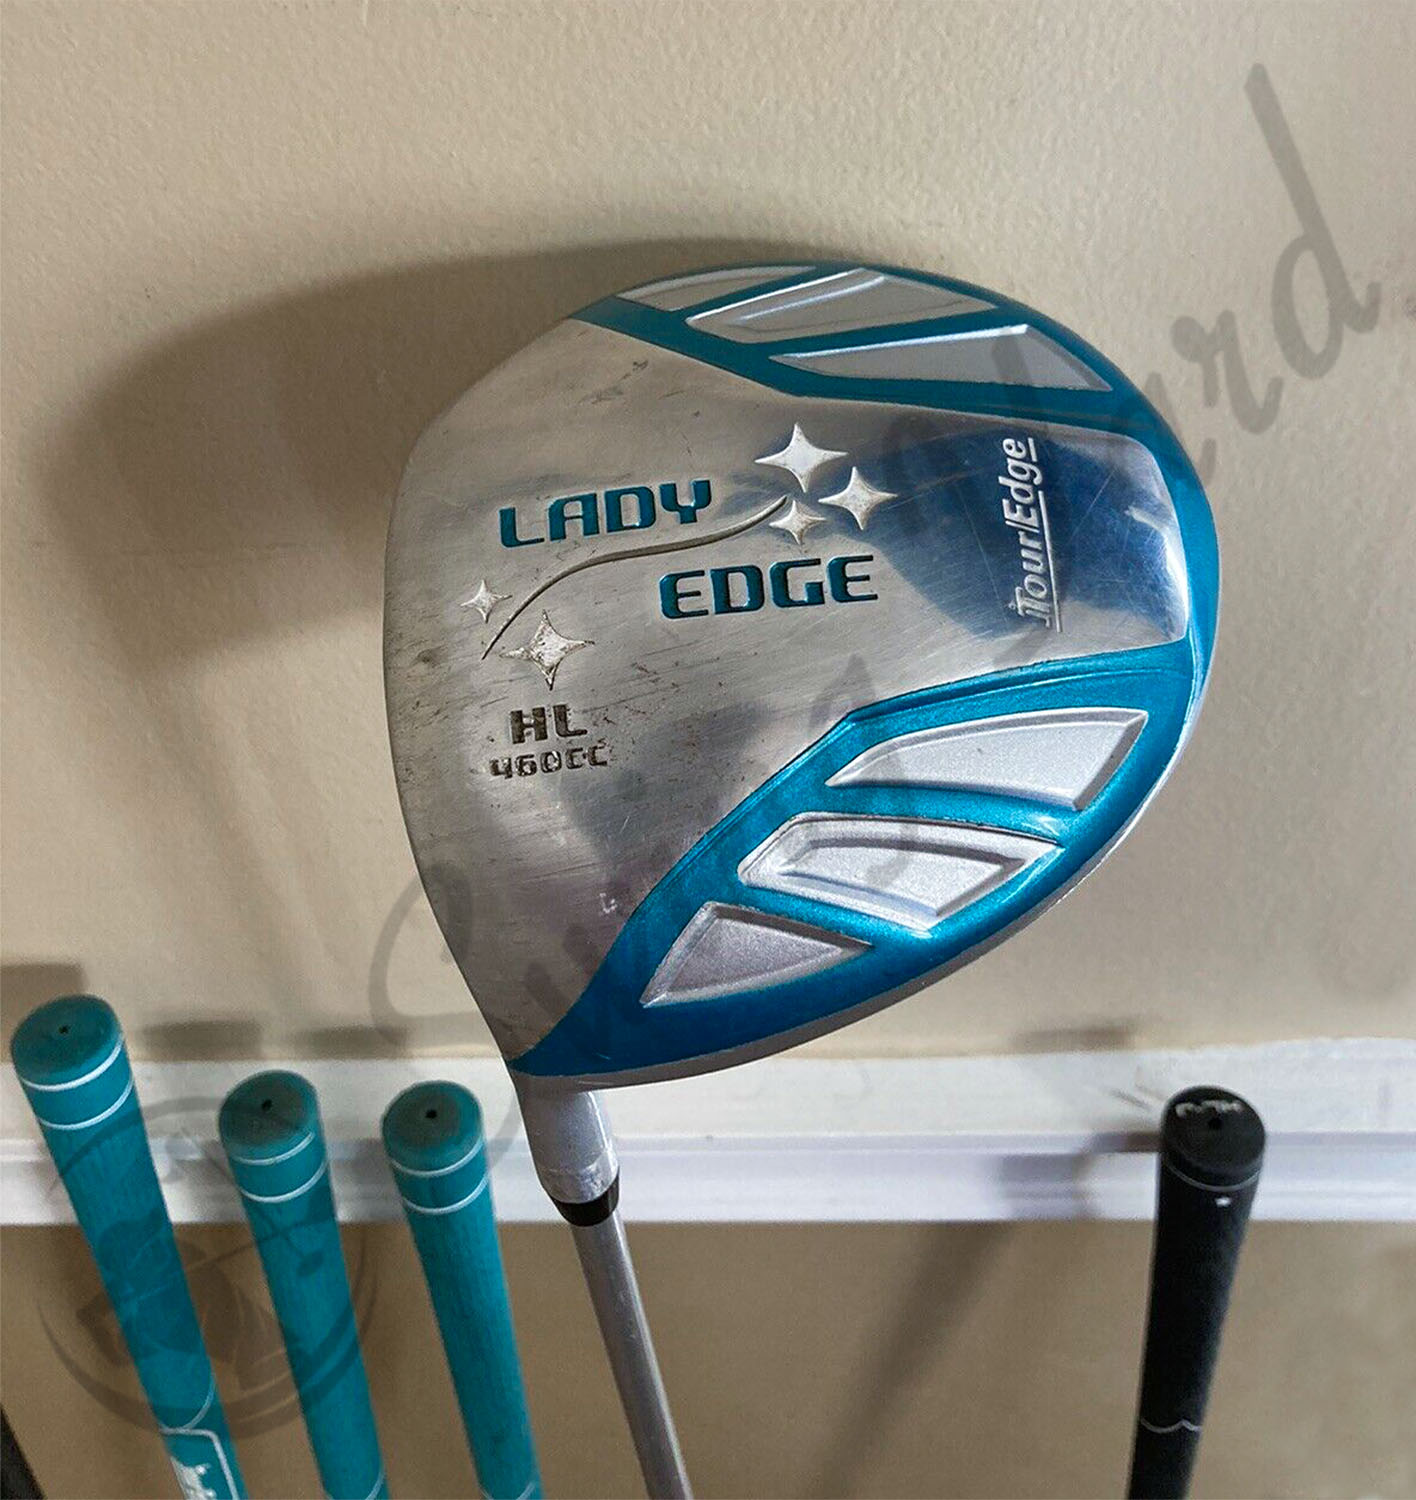 The Tour Edge Lady Edge driver for testing at the golf course